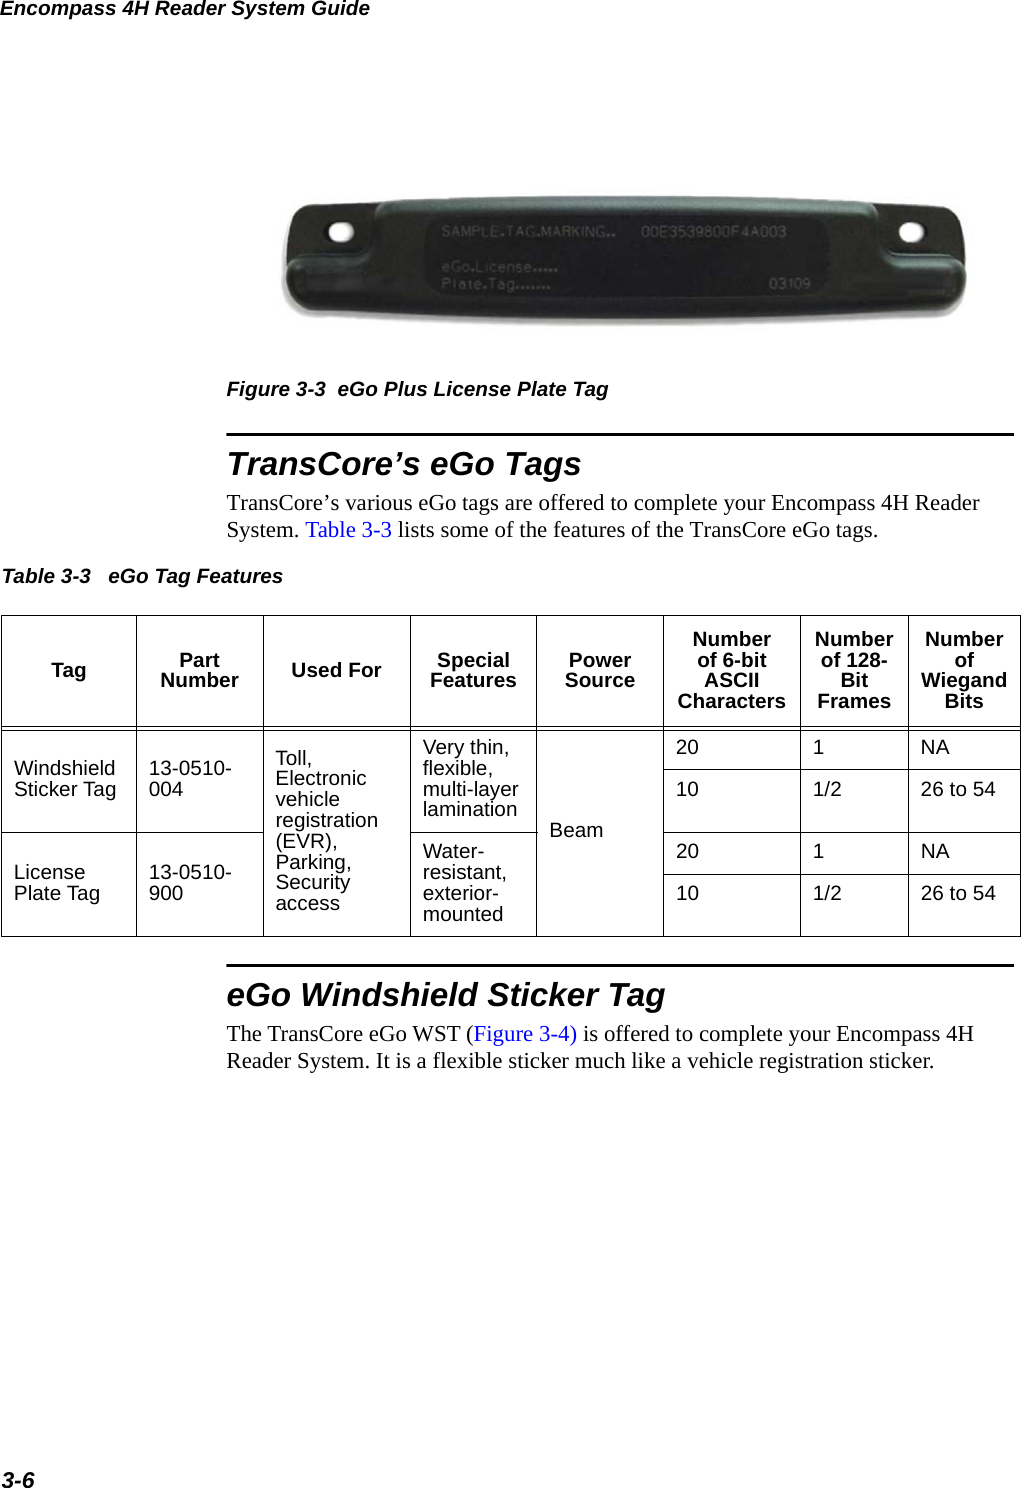 Encompass 4H Reader System Guide3-6Figure 3-3  eGo Plus License Plate TagTransCore’s eGo TagsTransCore’s various eGo tags are offered to complete your Encompass 4H Reader System. Table 3-3 lists some of the features of the TransCore eGo tags.Table 3-3  Tag Part Number Used For Special Features Power SourceNumber of 6-bit ASCII CharactersNumber of 128-Bit FramesNumber of Wiegand BitsWindshield Sticker Tag 13-0510-004Toll, Electronic vehicle registration (EVR),     Parking, Security accessVery thin, flexible, multi-layer lamination Beam20 1NA10 1/2 26 to 54License Plate Tag 13-0510-900Water-resistant, exterior-mounted20 1NA10 1/2 26 to 54 eGo Tag FeatureseGo Windshield Sticker TagThe TransCore eGo WST (Figure 3-4) is offered to complete your Encompass 4H Reader System. It is a flexible sticker much like a vehicle registration sticker.